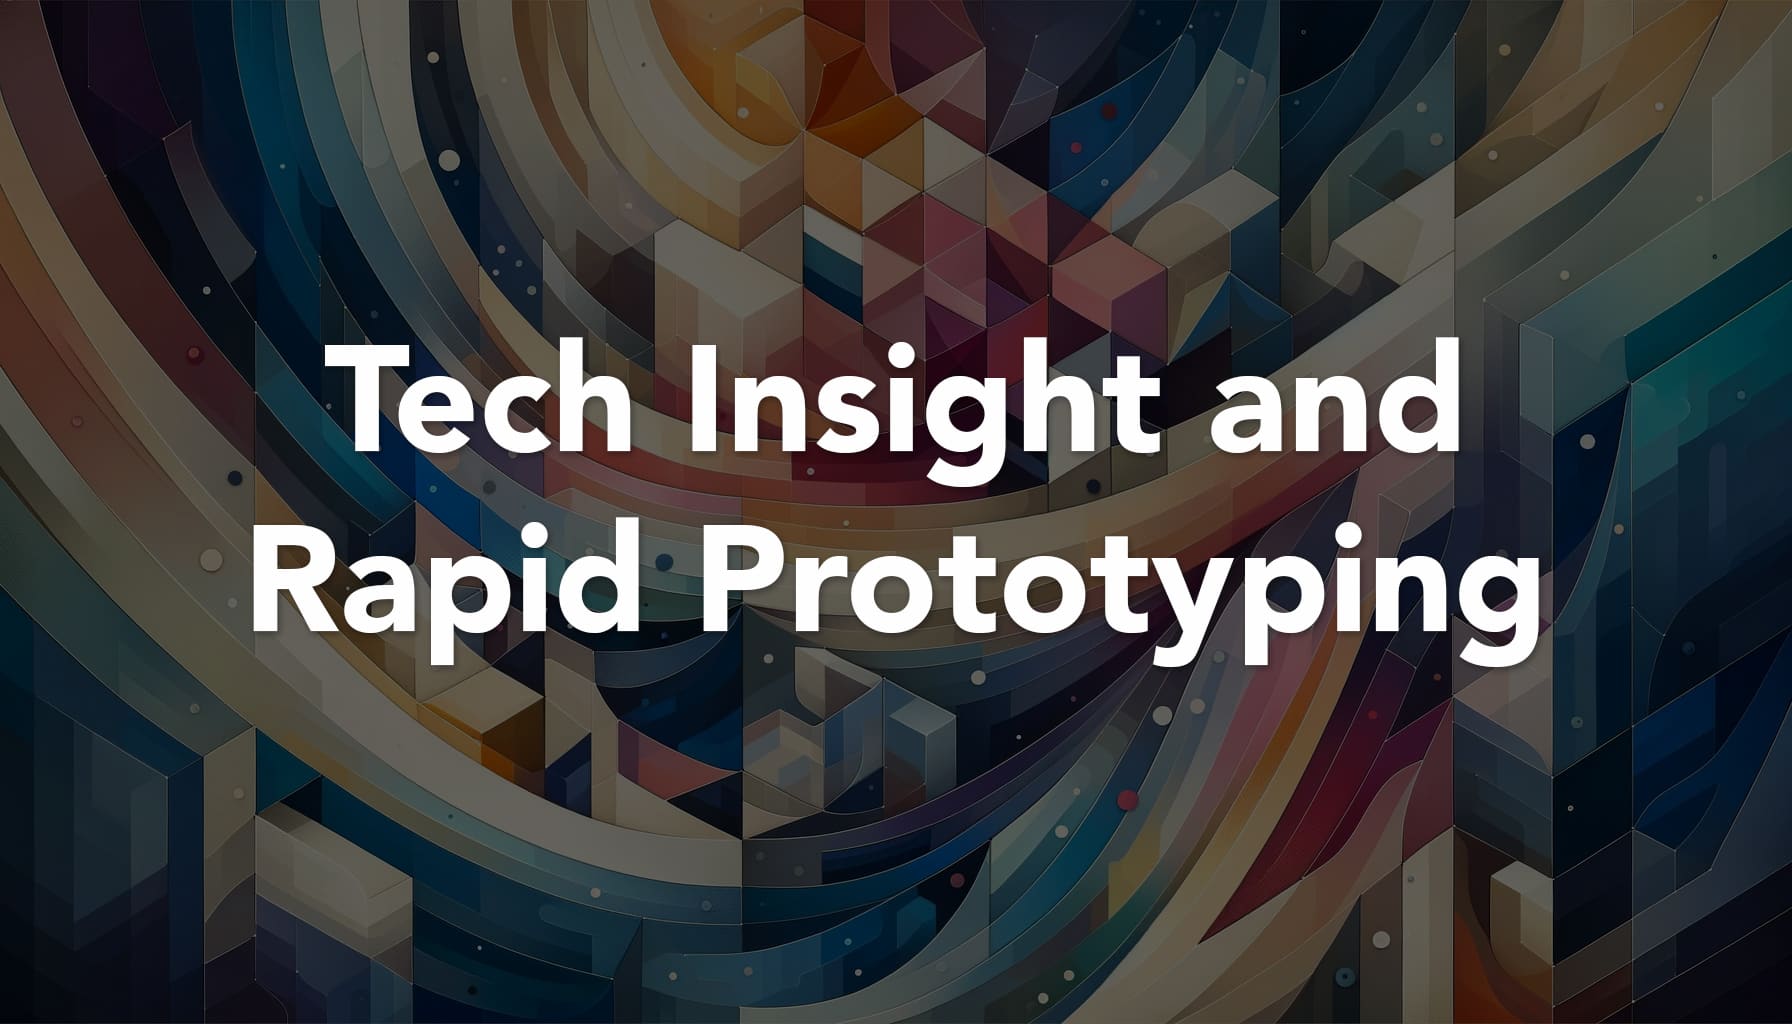 Tech Insight and Rapid Prototyping